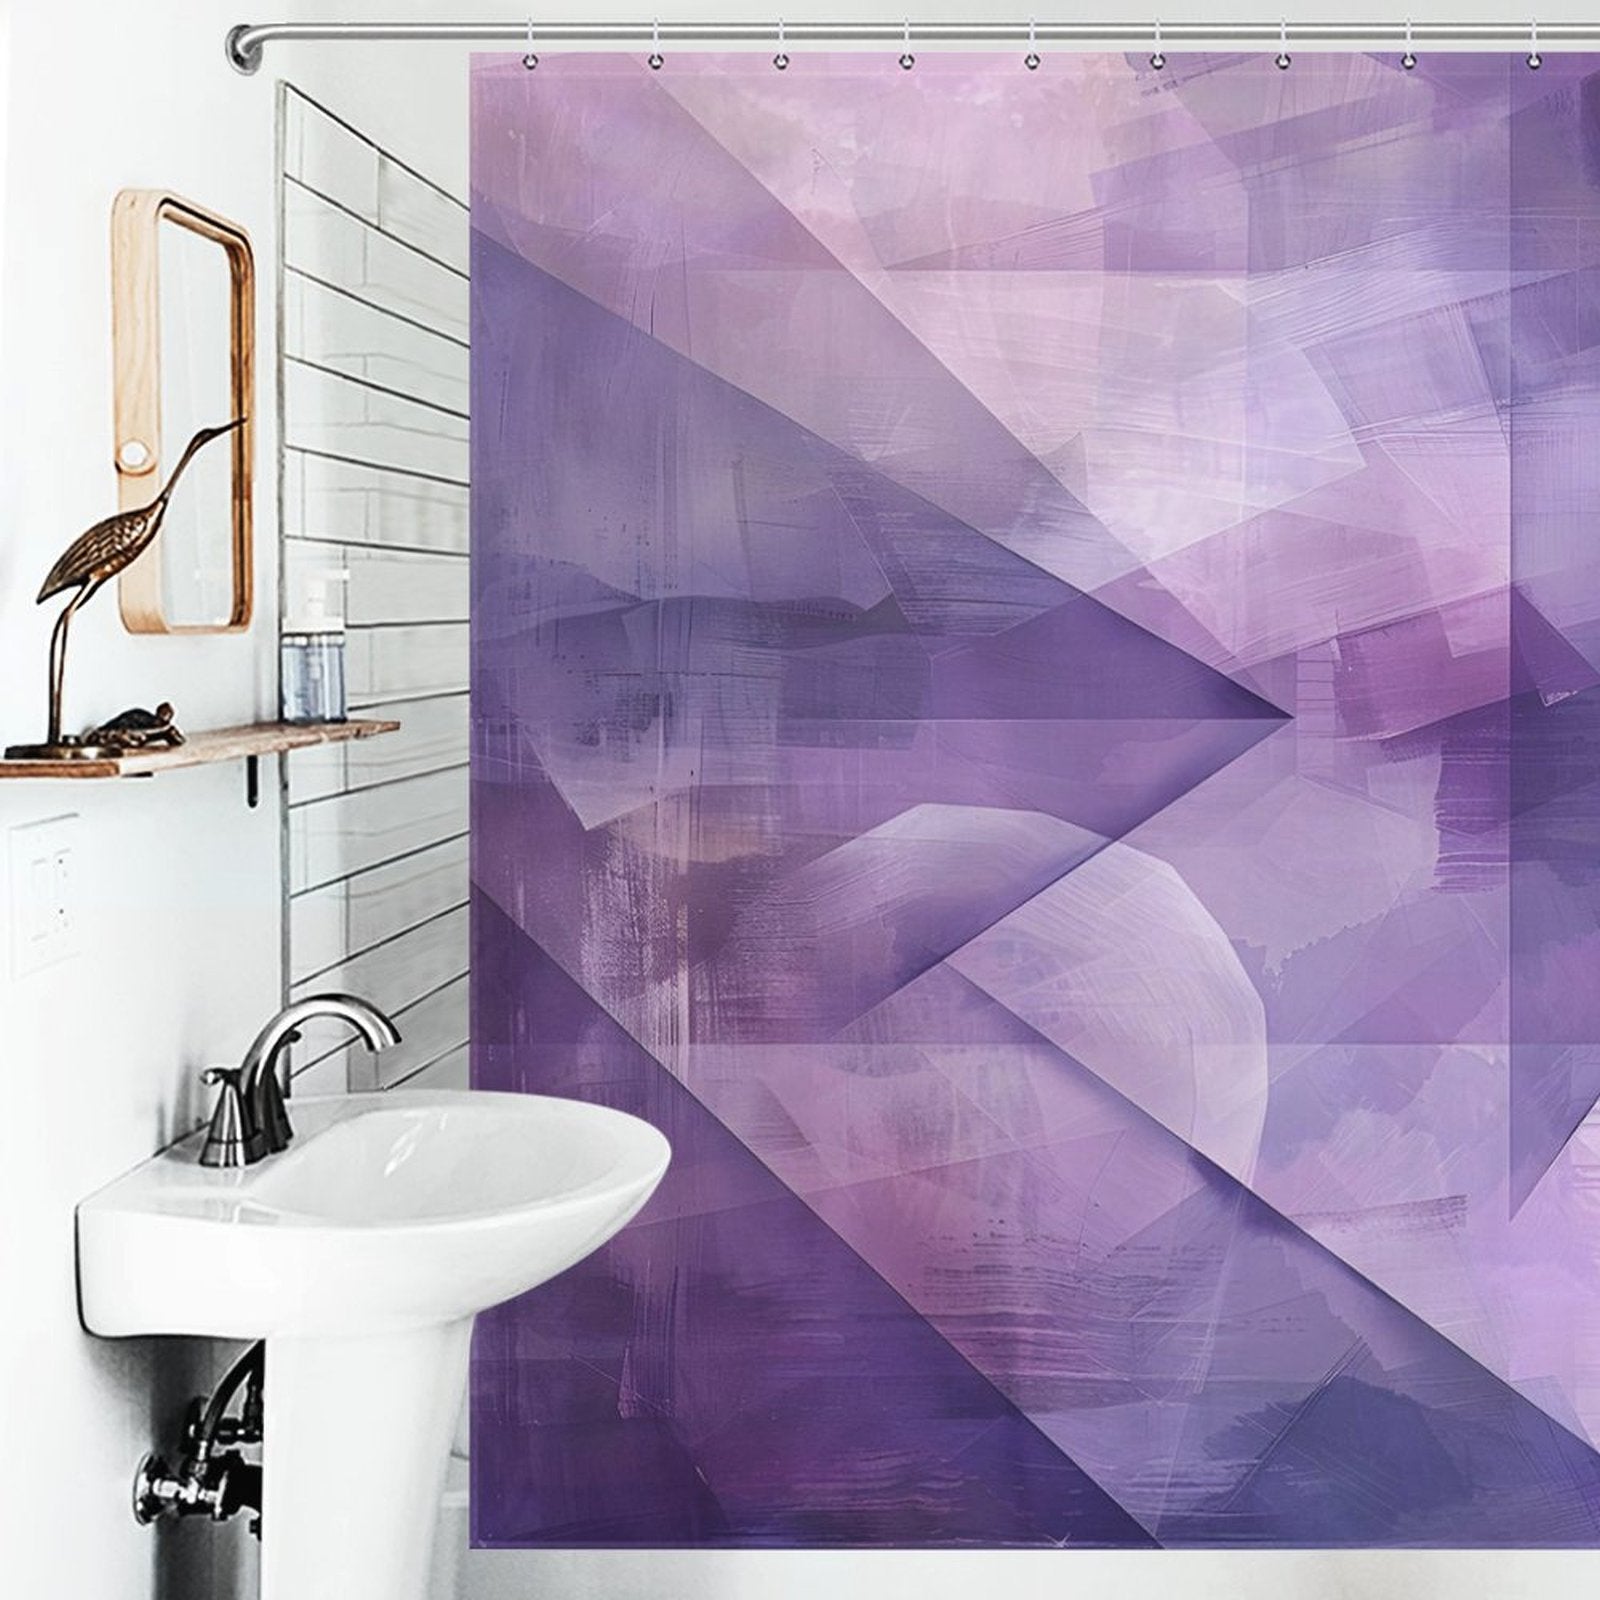 A modern bathroom features a white sink, a shelf with a decorative bird sculpture, and a minimalist bathroom decor highlighted by a Purple Abstract Modern Boho Geometric Art Minimalist Shower Curtain-Cottoncat from Cotton Cat.